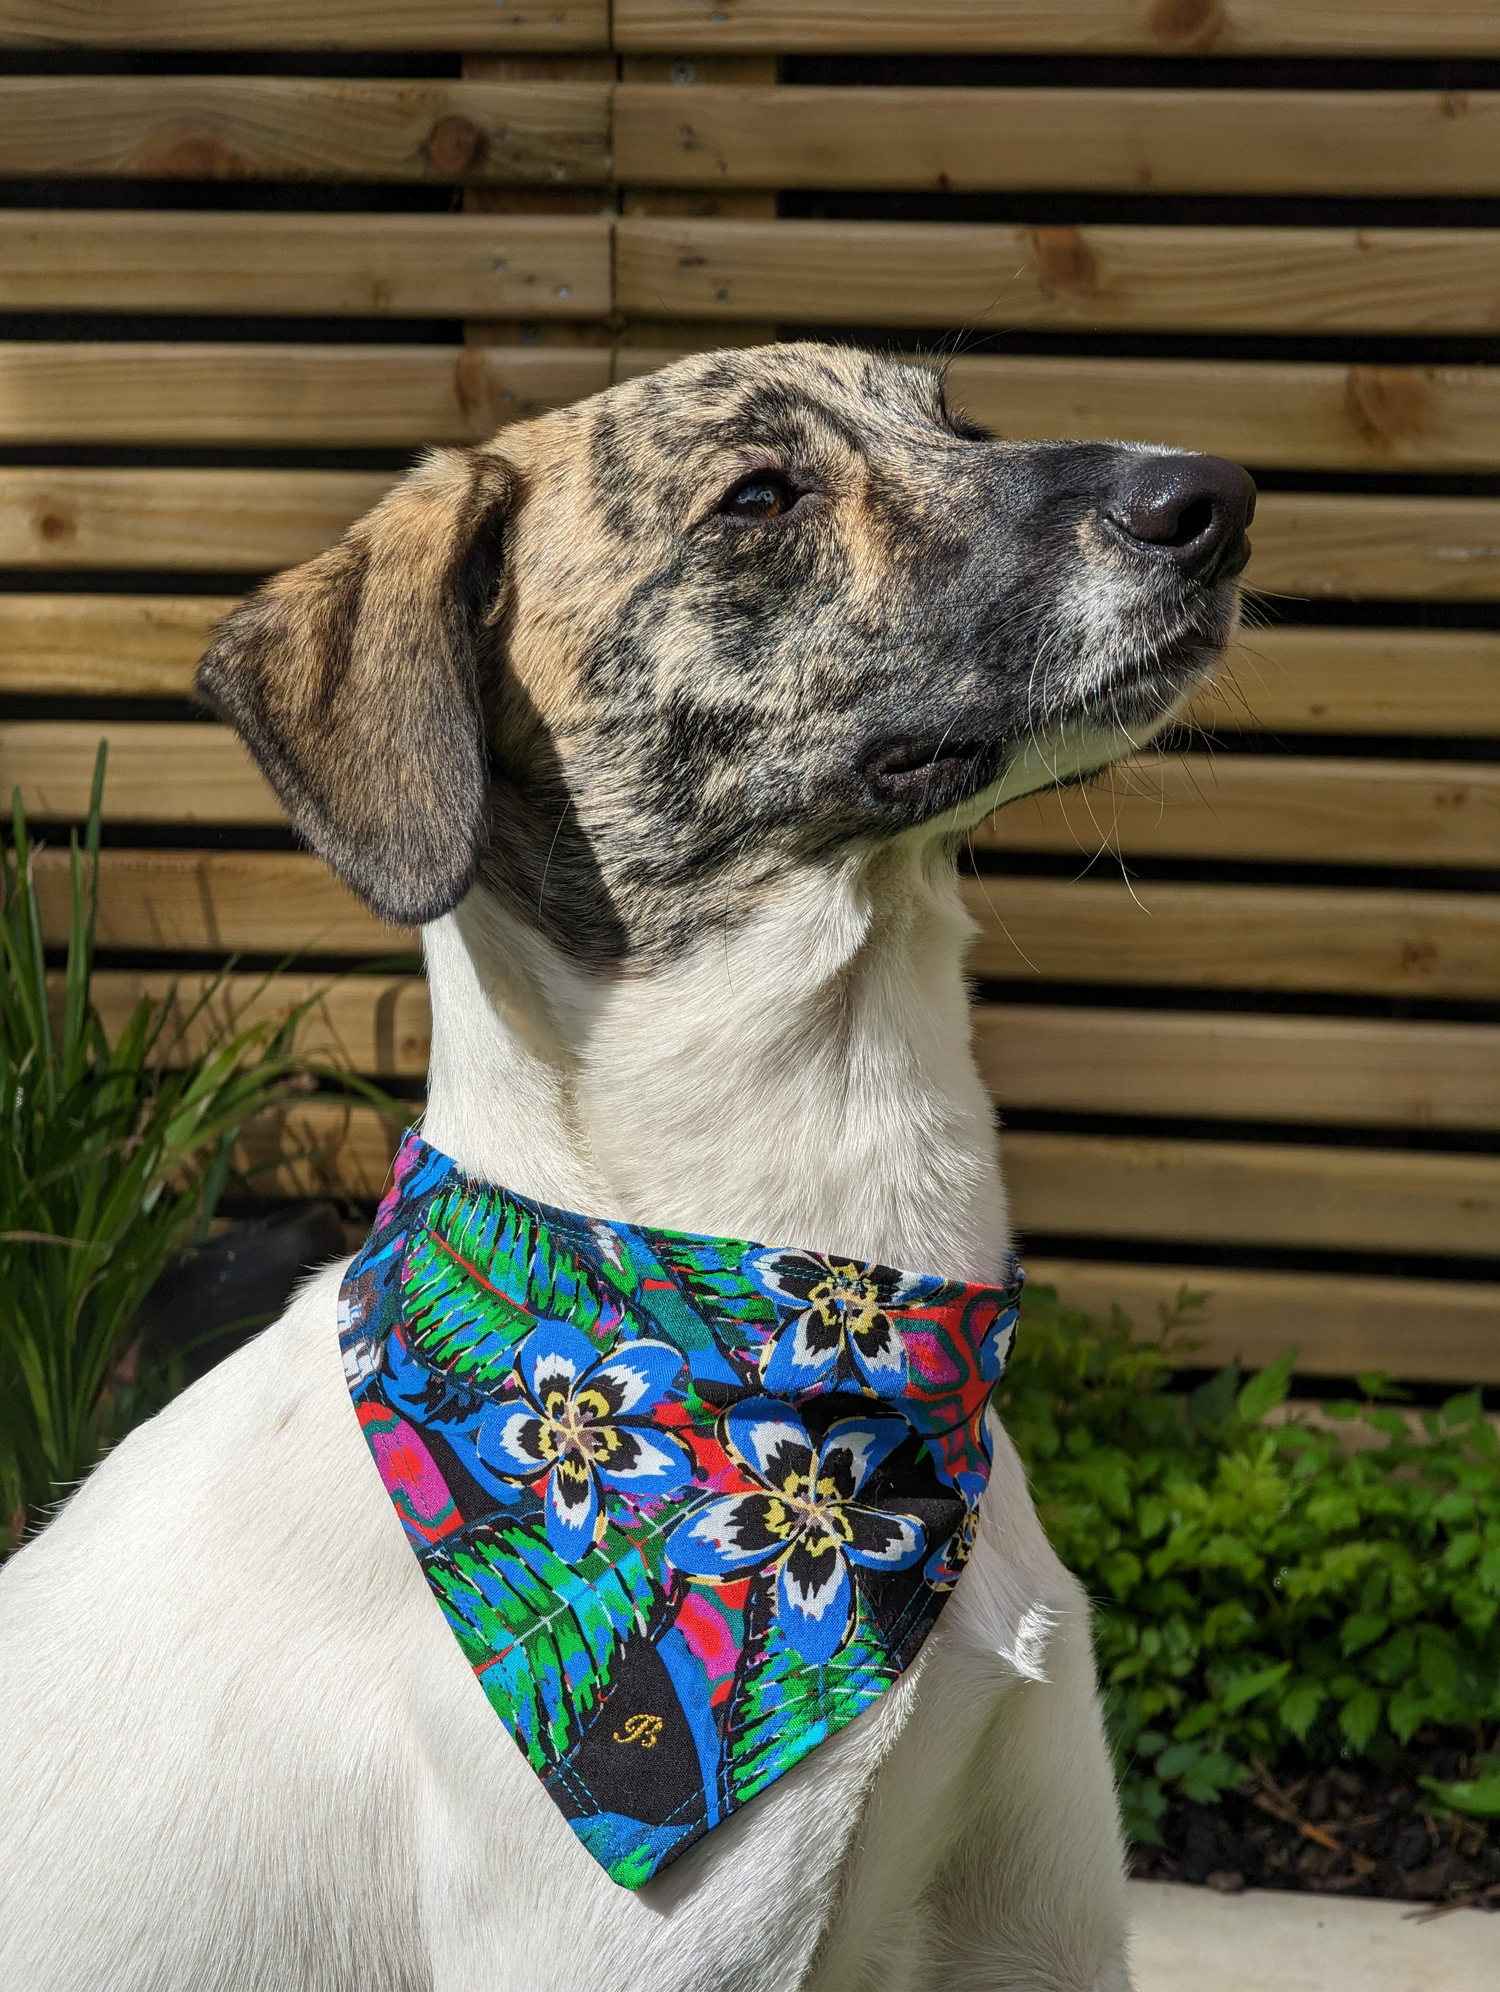 A  dog wearing a black and green bandana with a floral pattern. The bandana is tied loosely around the dog's neck and hangs down to its chest. The dog is looking at the camera with a curious expression.